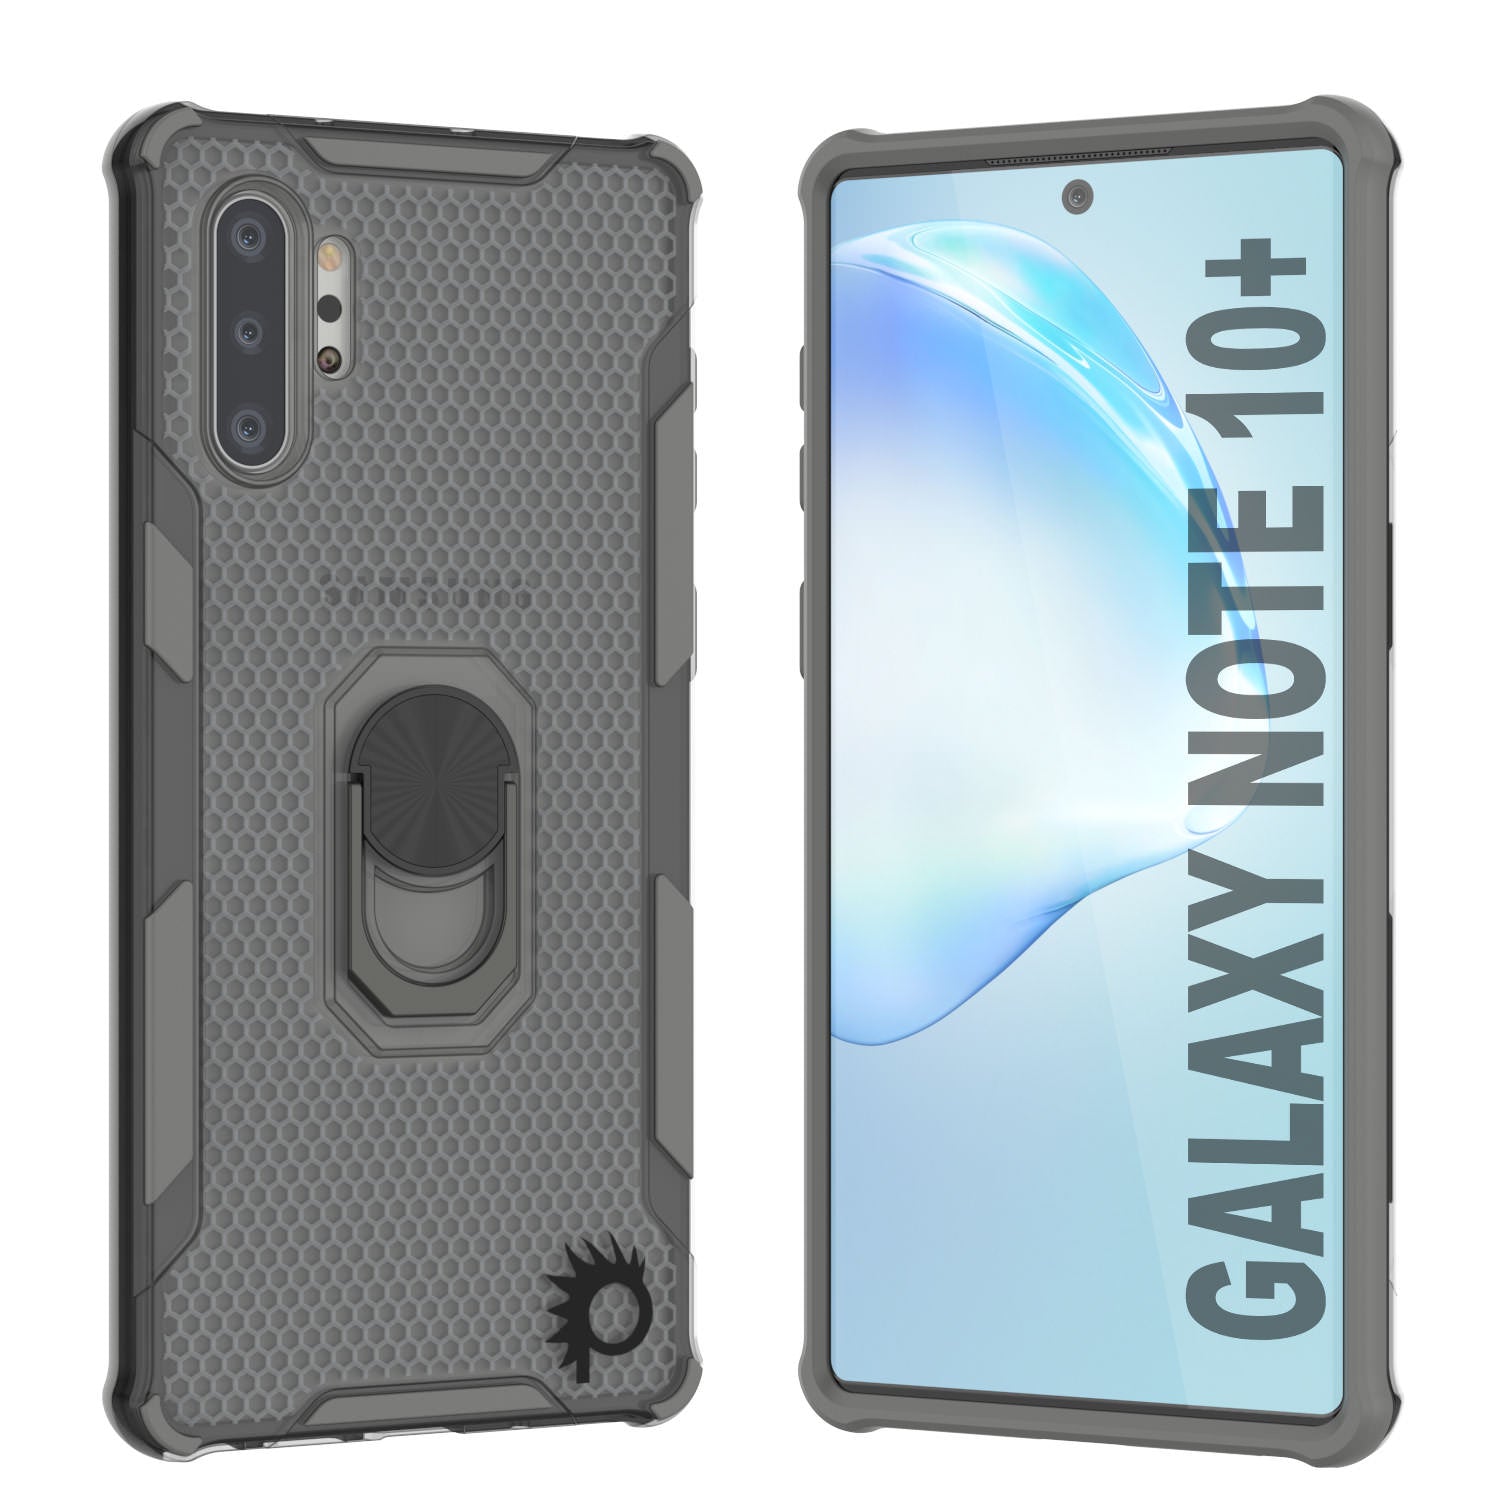 Punkcase Galaxy Note 10 Plus Case [Magnetix 2.0 Series] Clear Protective TPU Cover W/Kickstand [Grey]